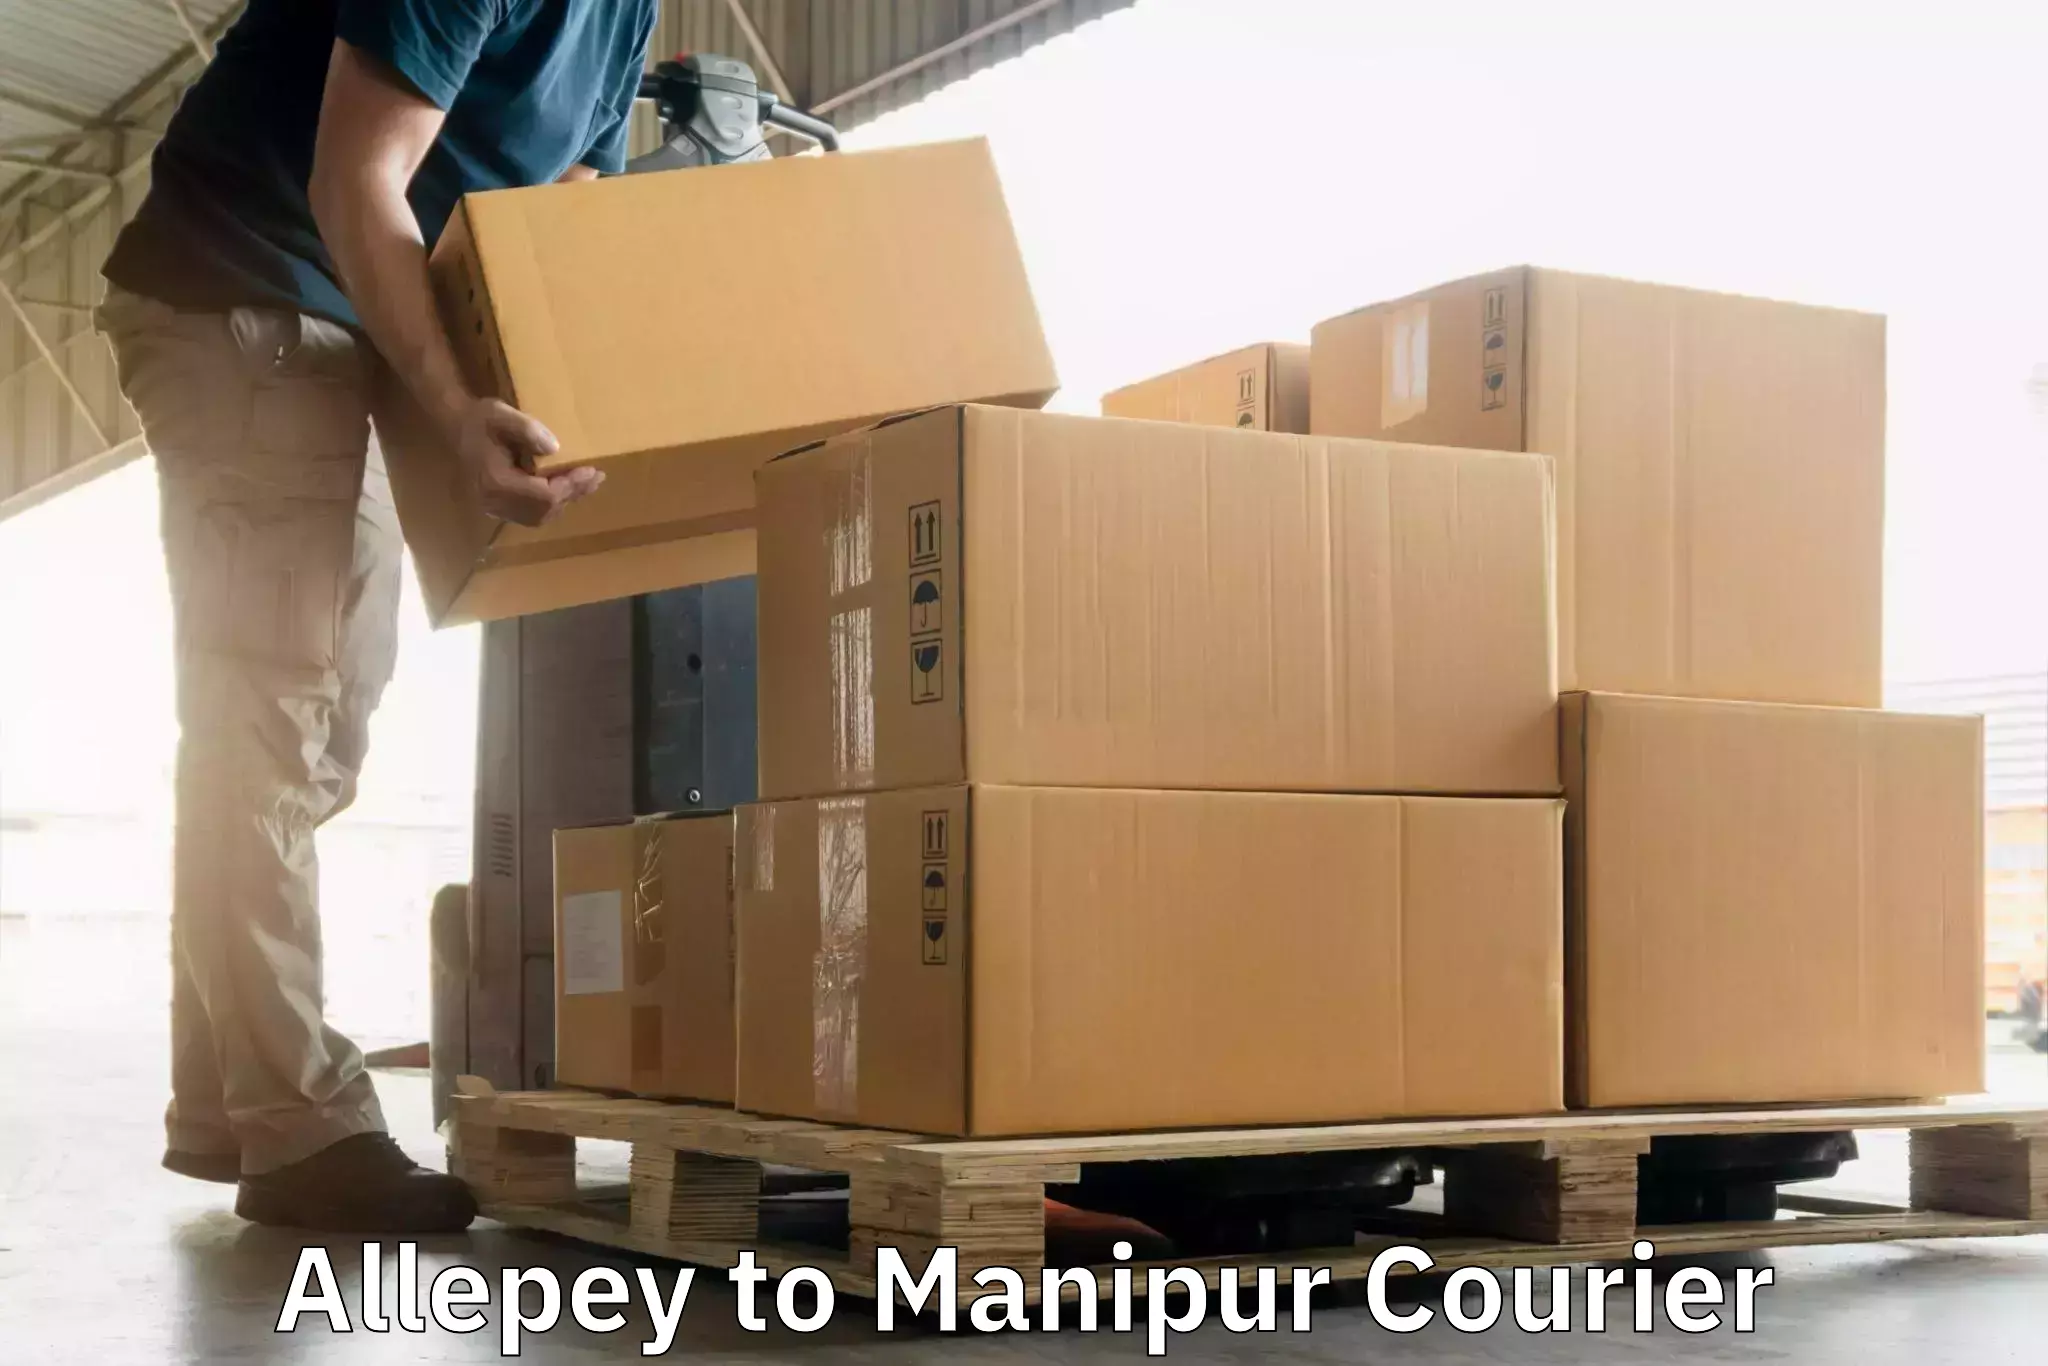 On-call courier service Allepey to Manipur